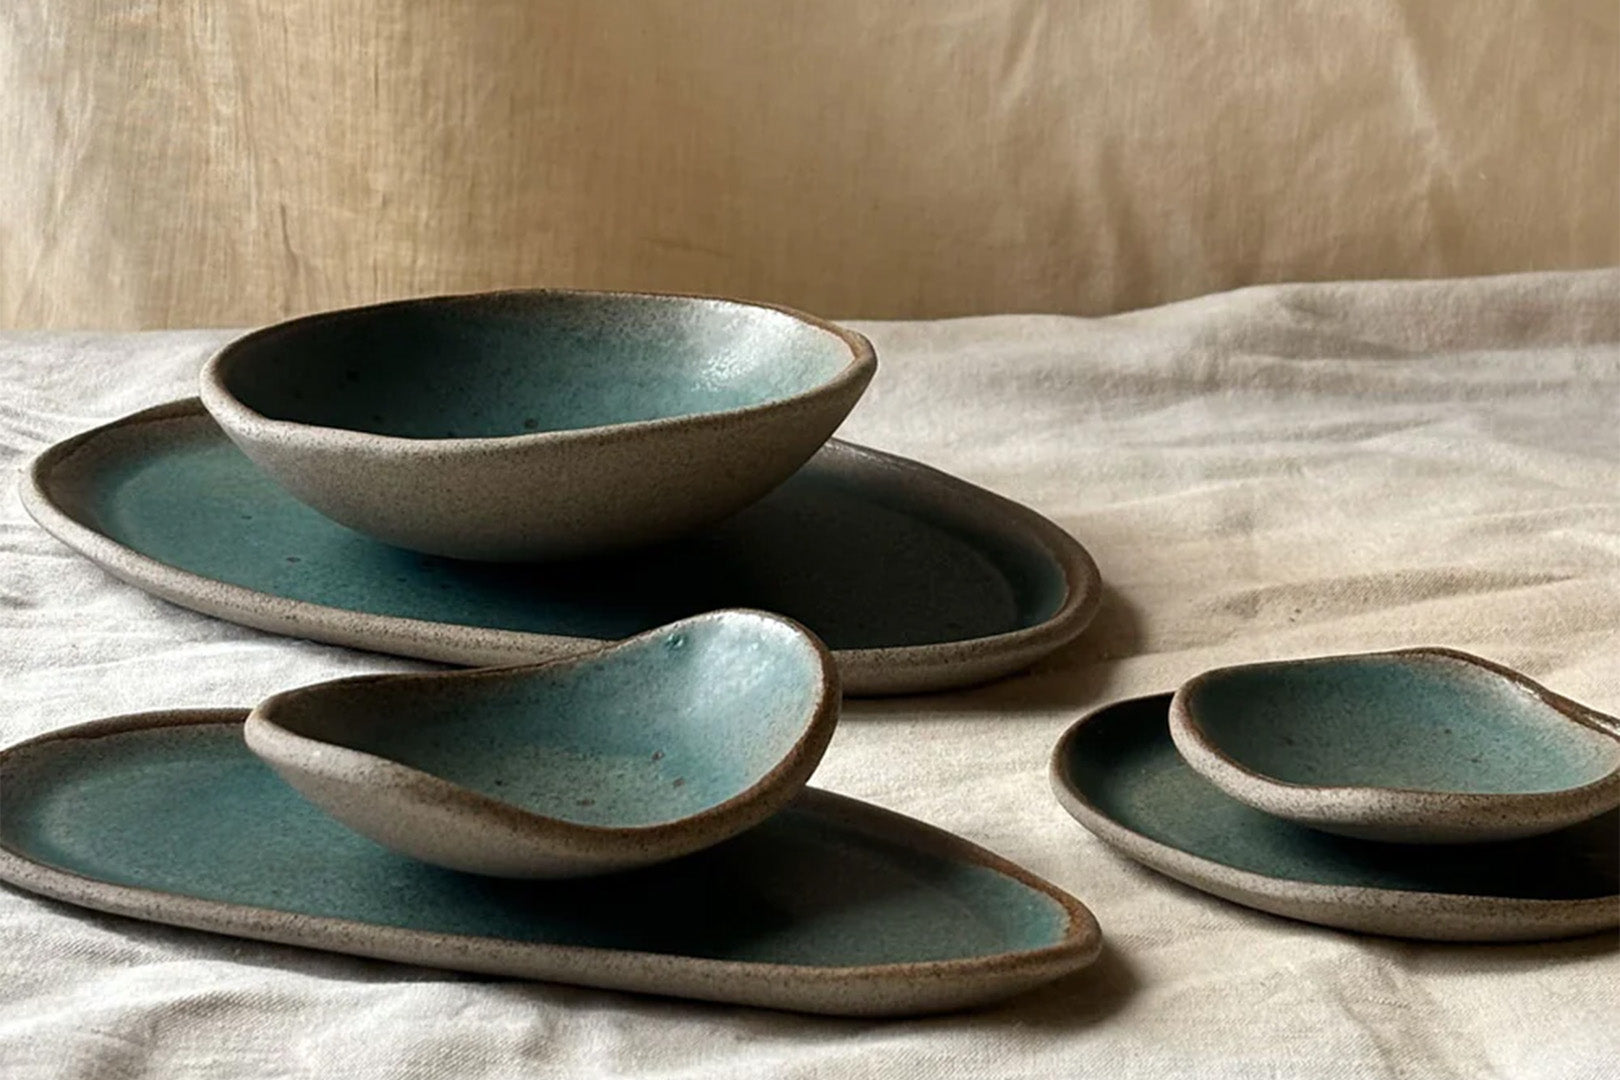 Artisanal ceramic dishware with a unique teal glaze, arranged thoughtfully on a neutral textile.